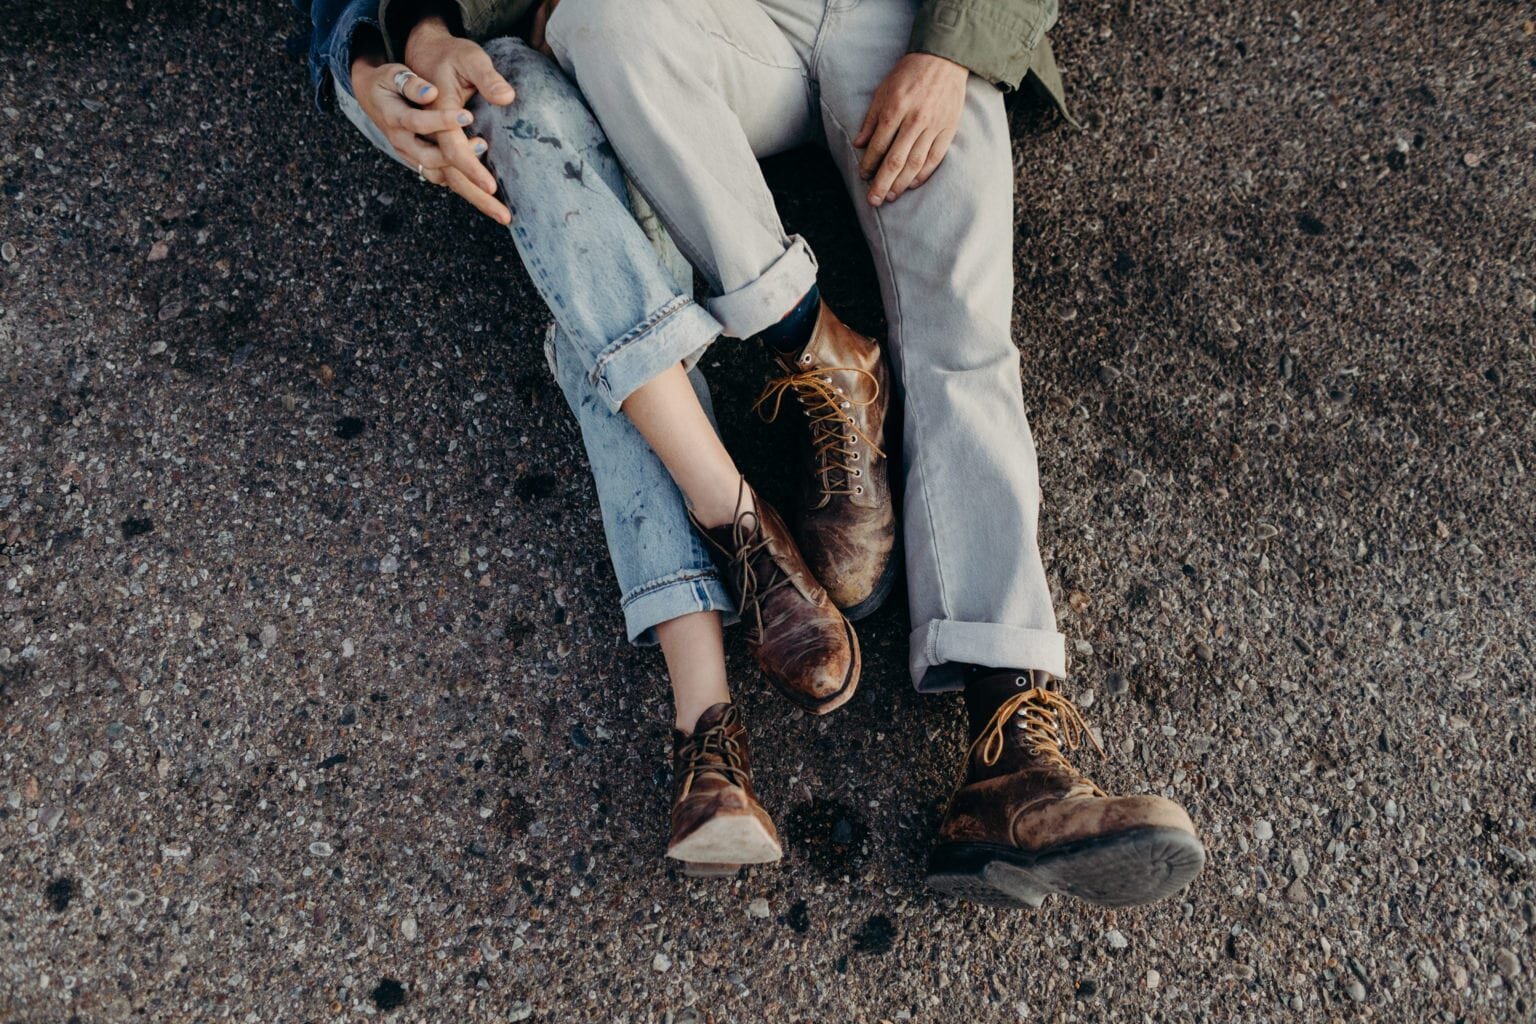 Couple under a car being cozy